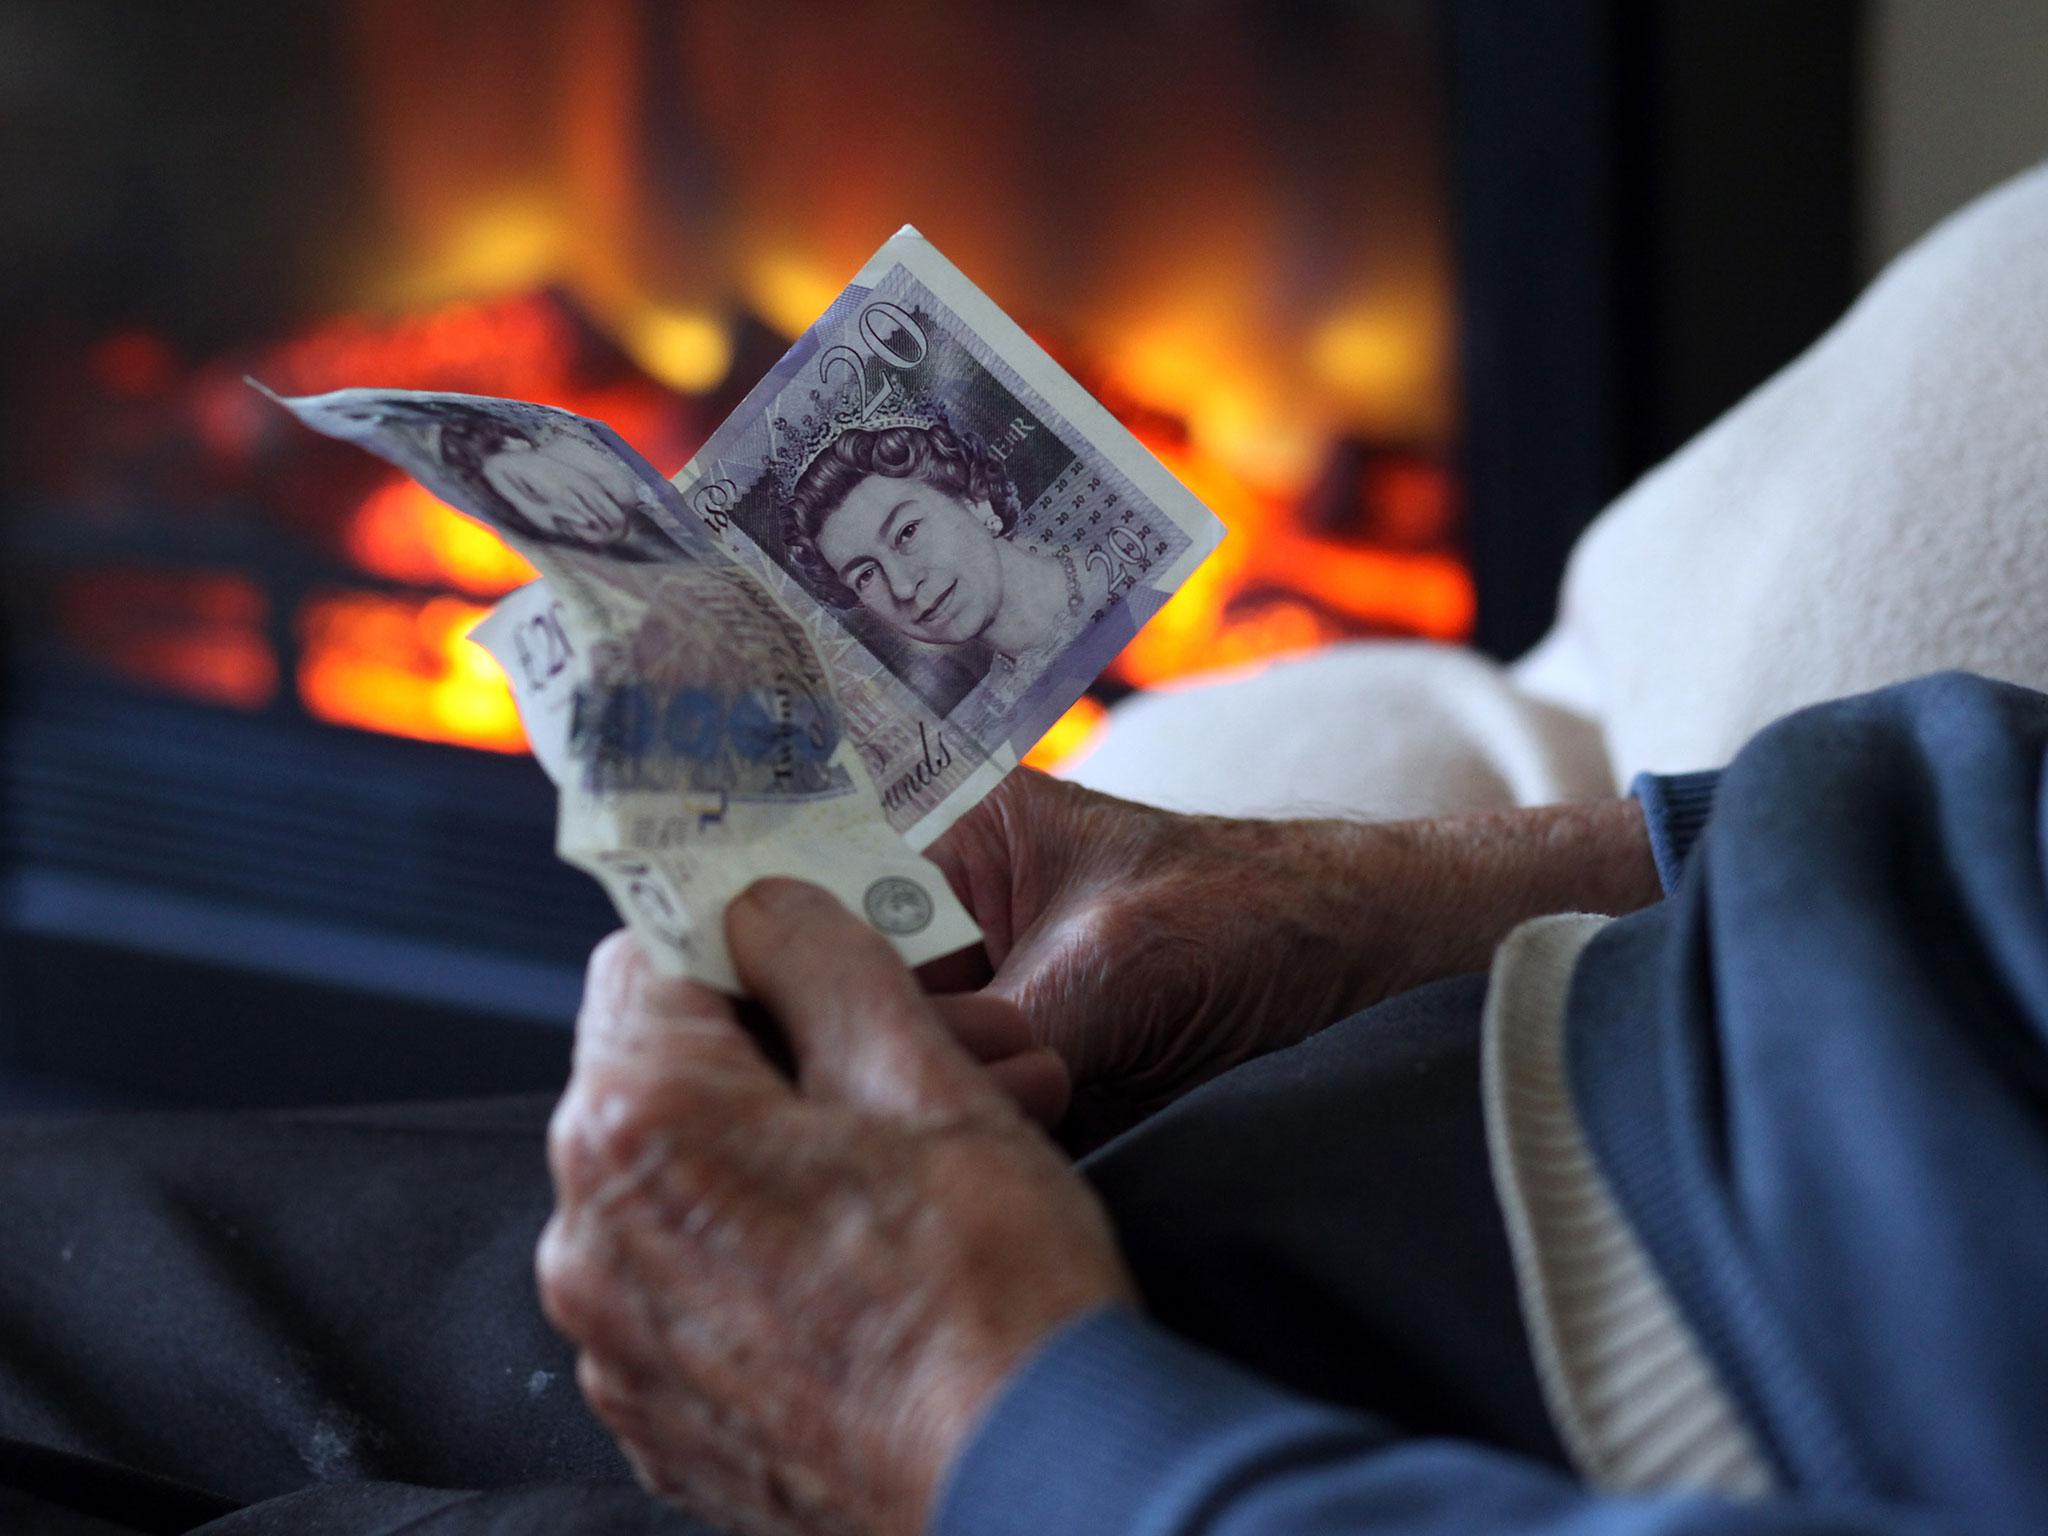 Vulnerable customers, such as those on low incomes, used to be charged some of the highest rates in the market, Ofgem said